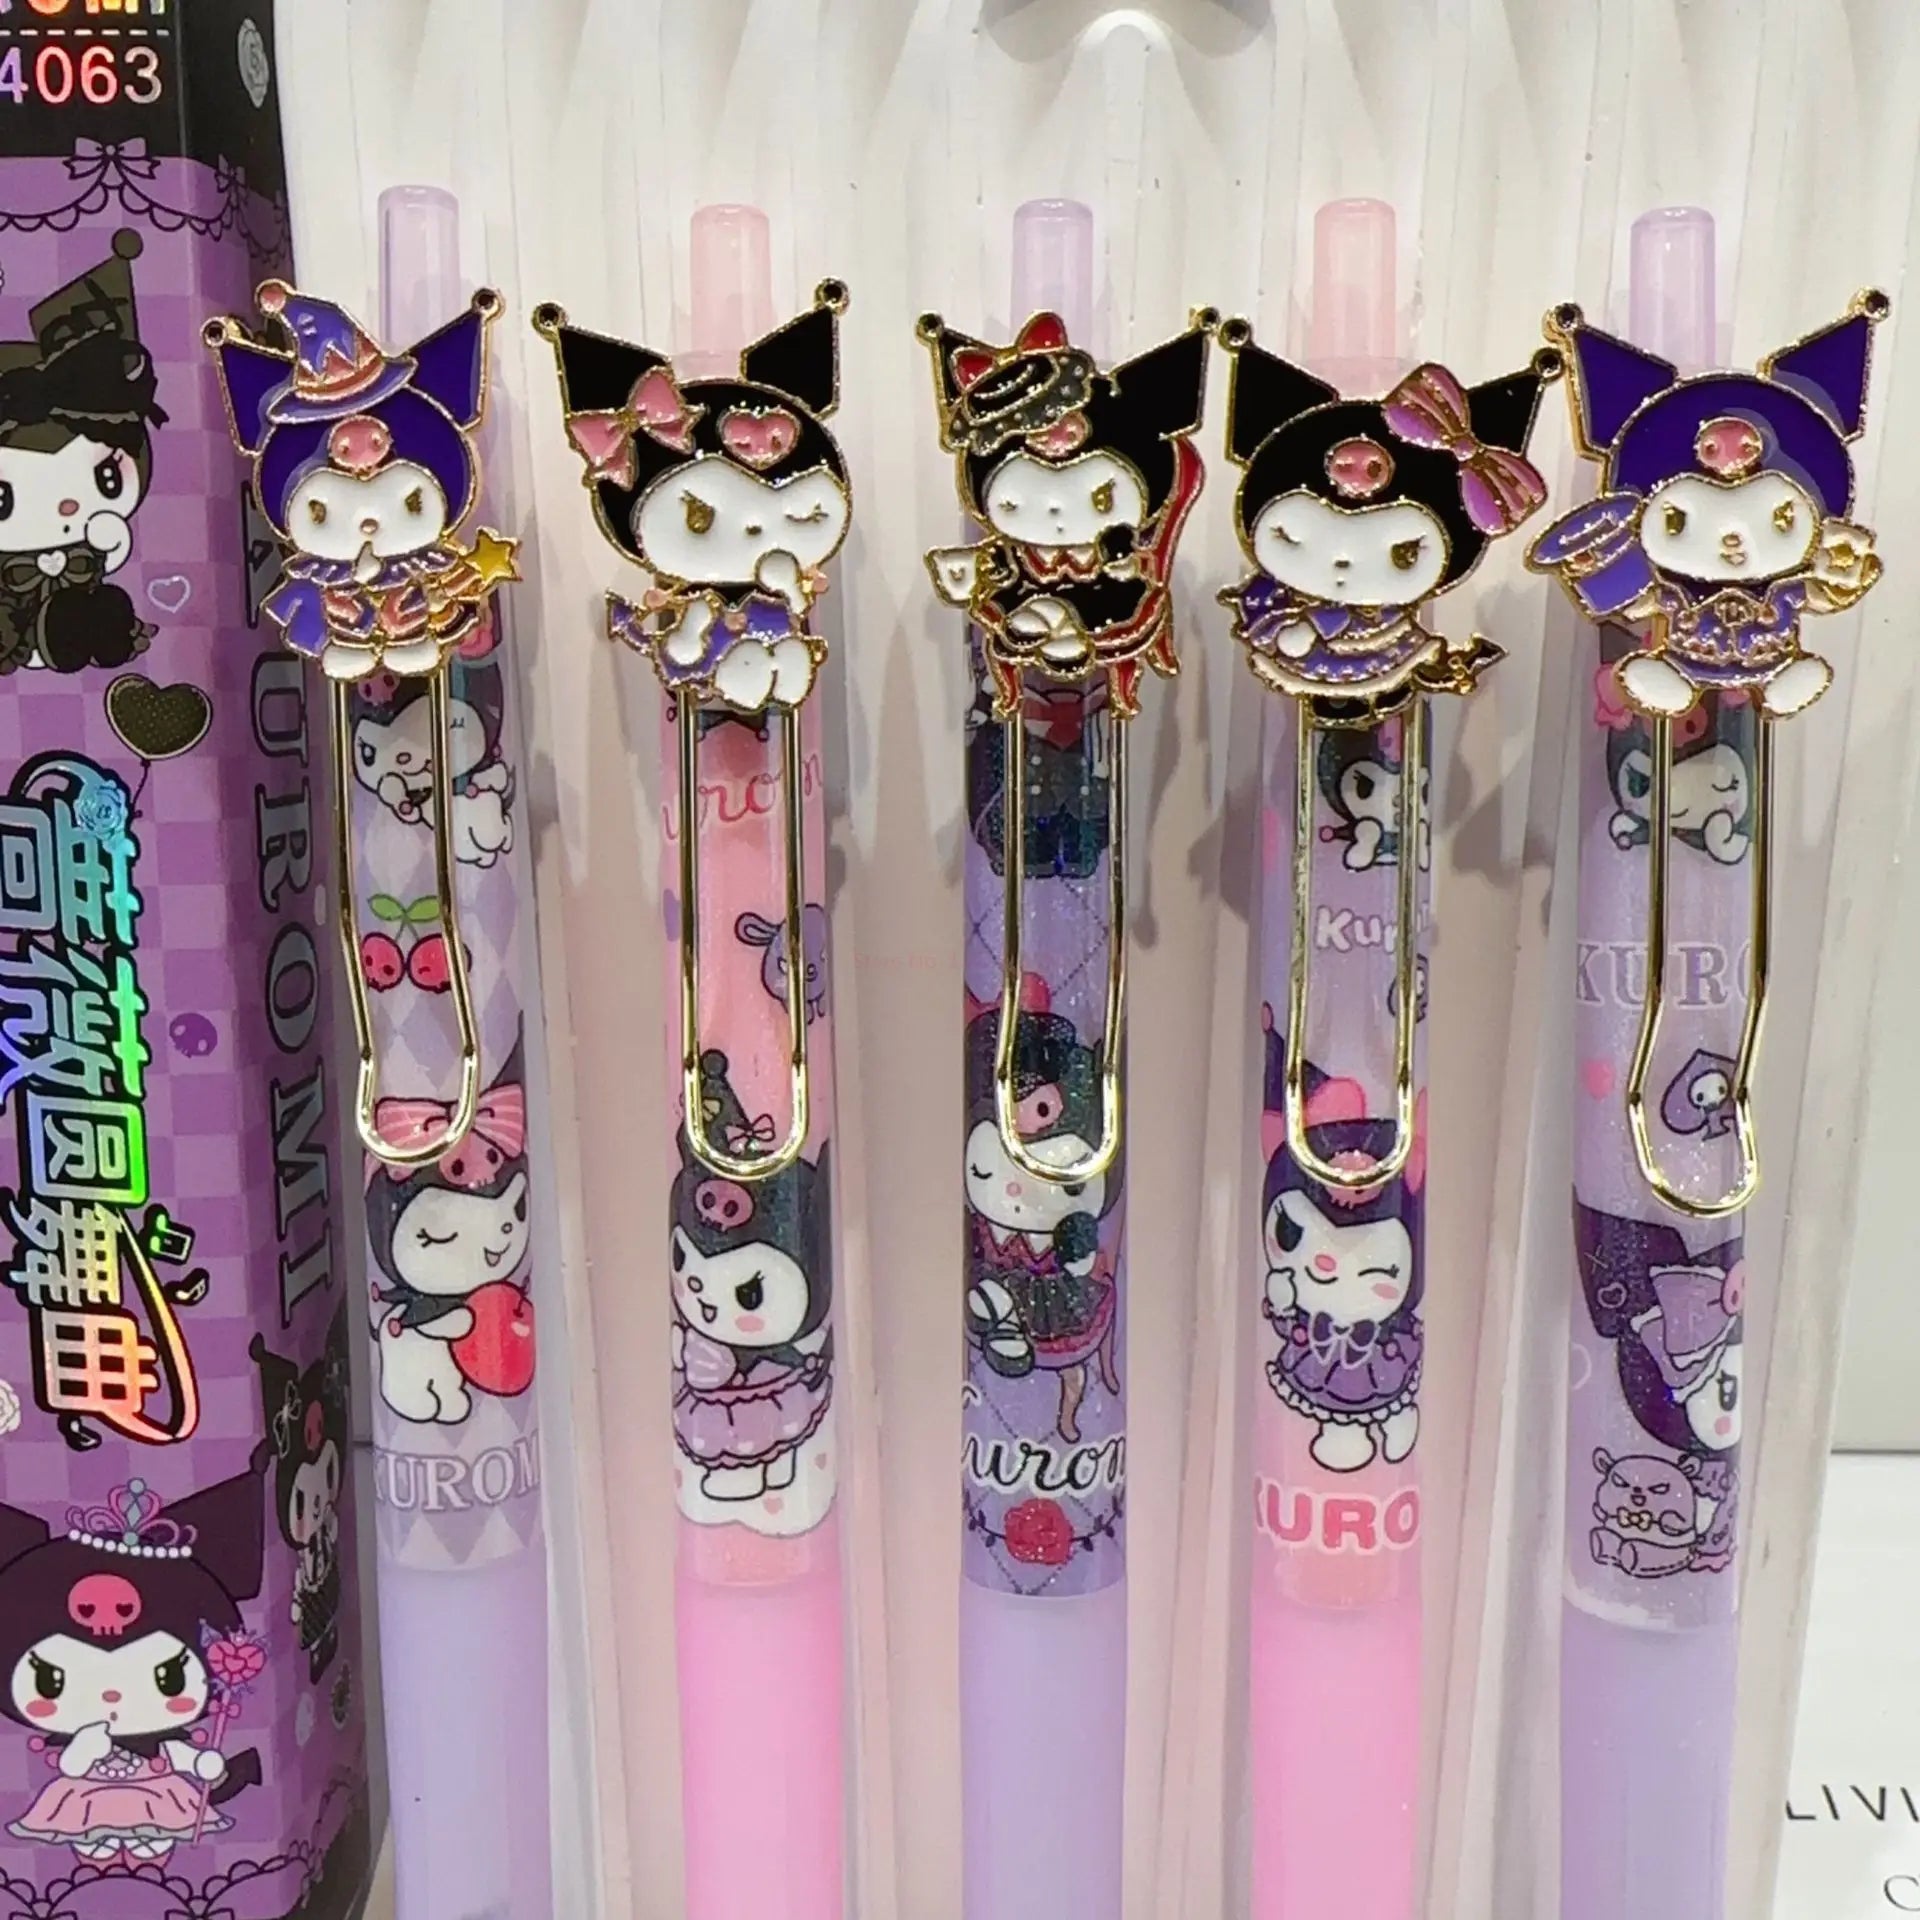 A group of Kuromi-themed gel pens in a blind box, featuring cartoon characters. From Strangecat Toys, a blind box and art toy store.